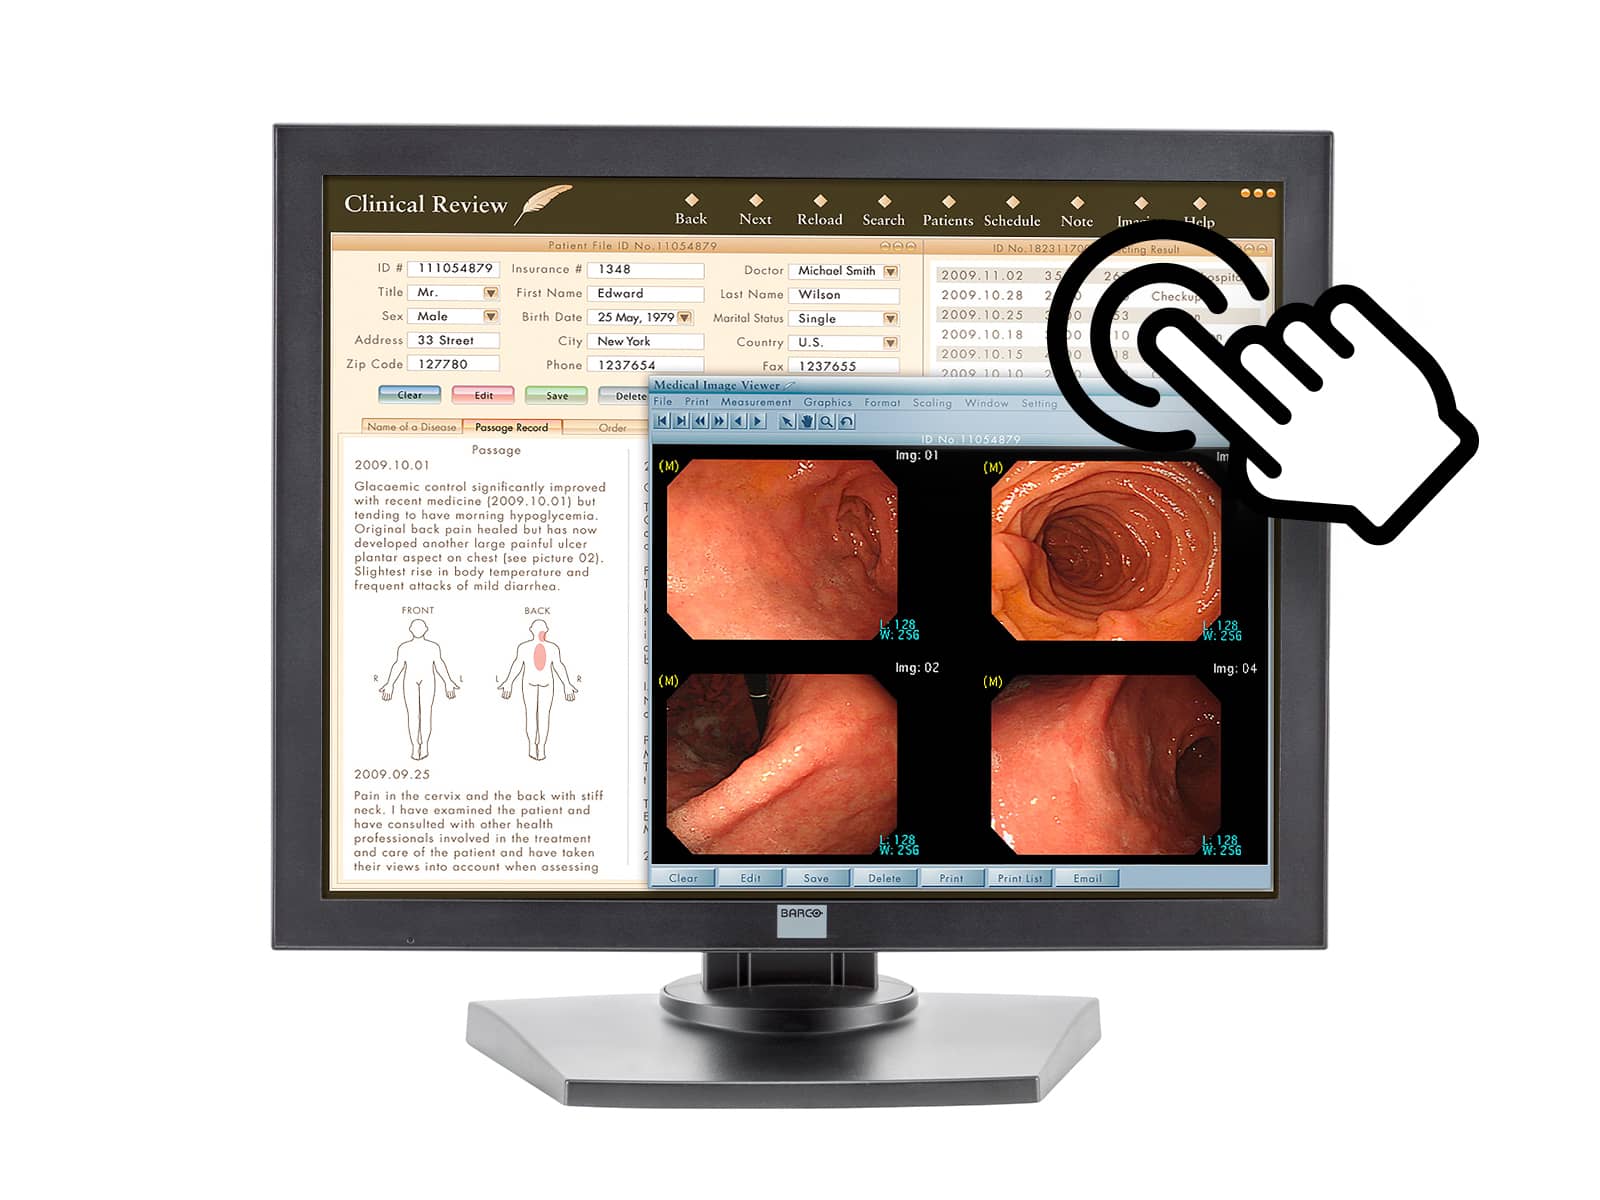 Barco MDRC-1119-TS 1MP 19" Touchscreen Color Clinical Review Display Monitors.com 